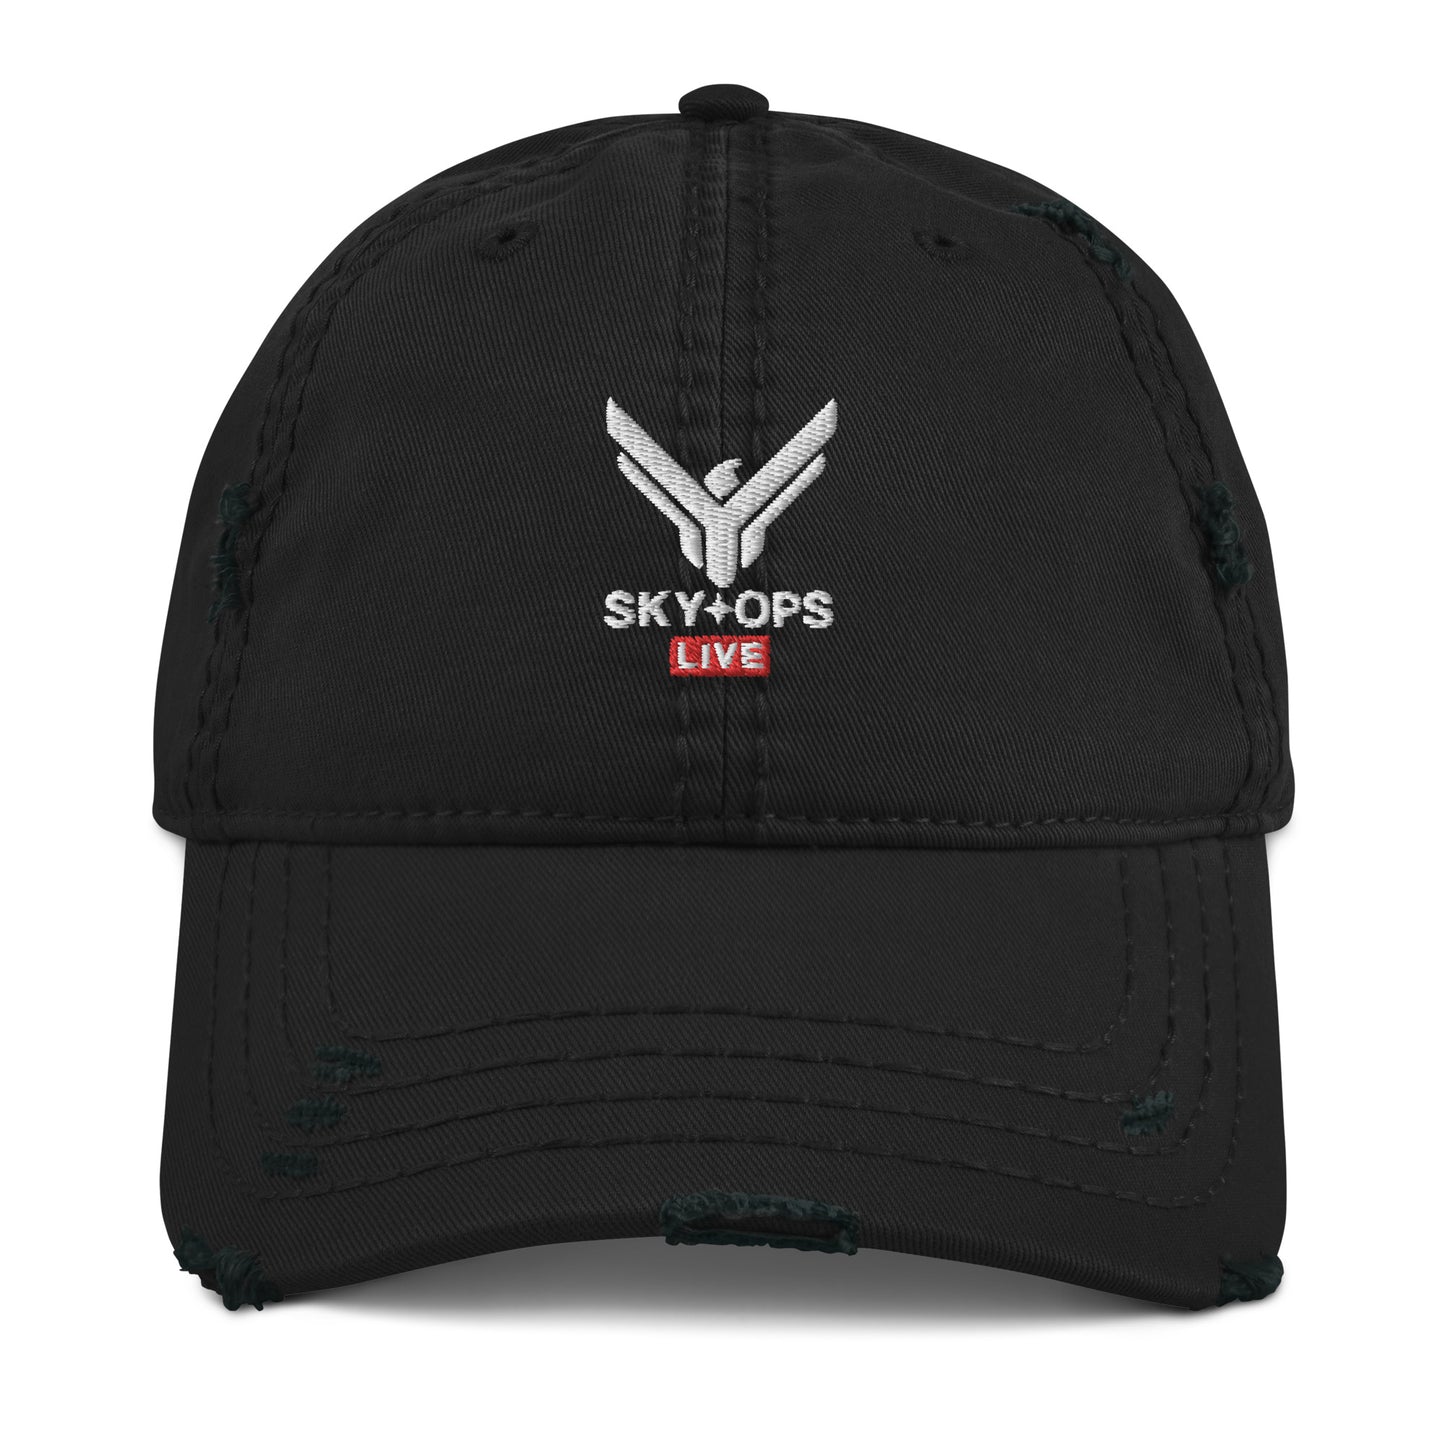 Distressed Dad Hat - Sky Ops Live Classic Logo